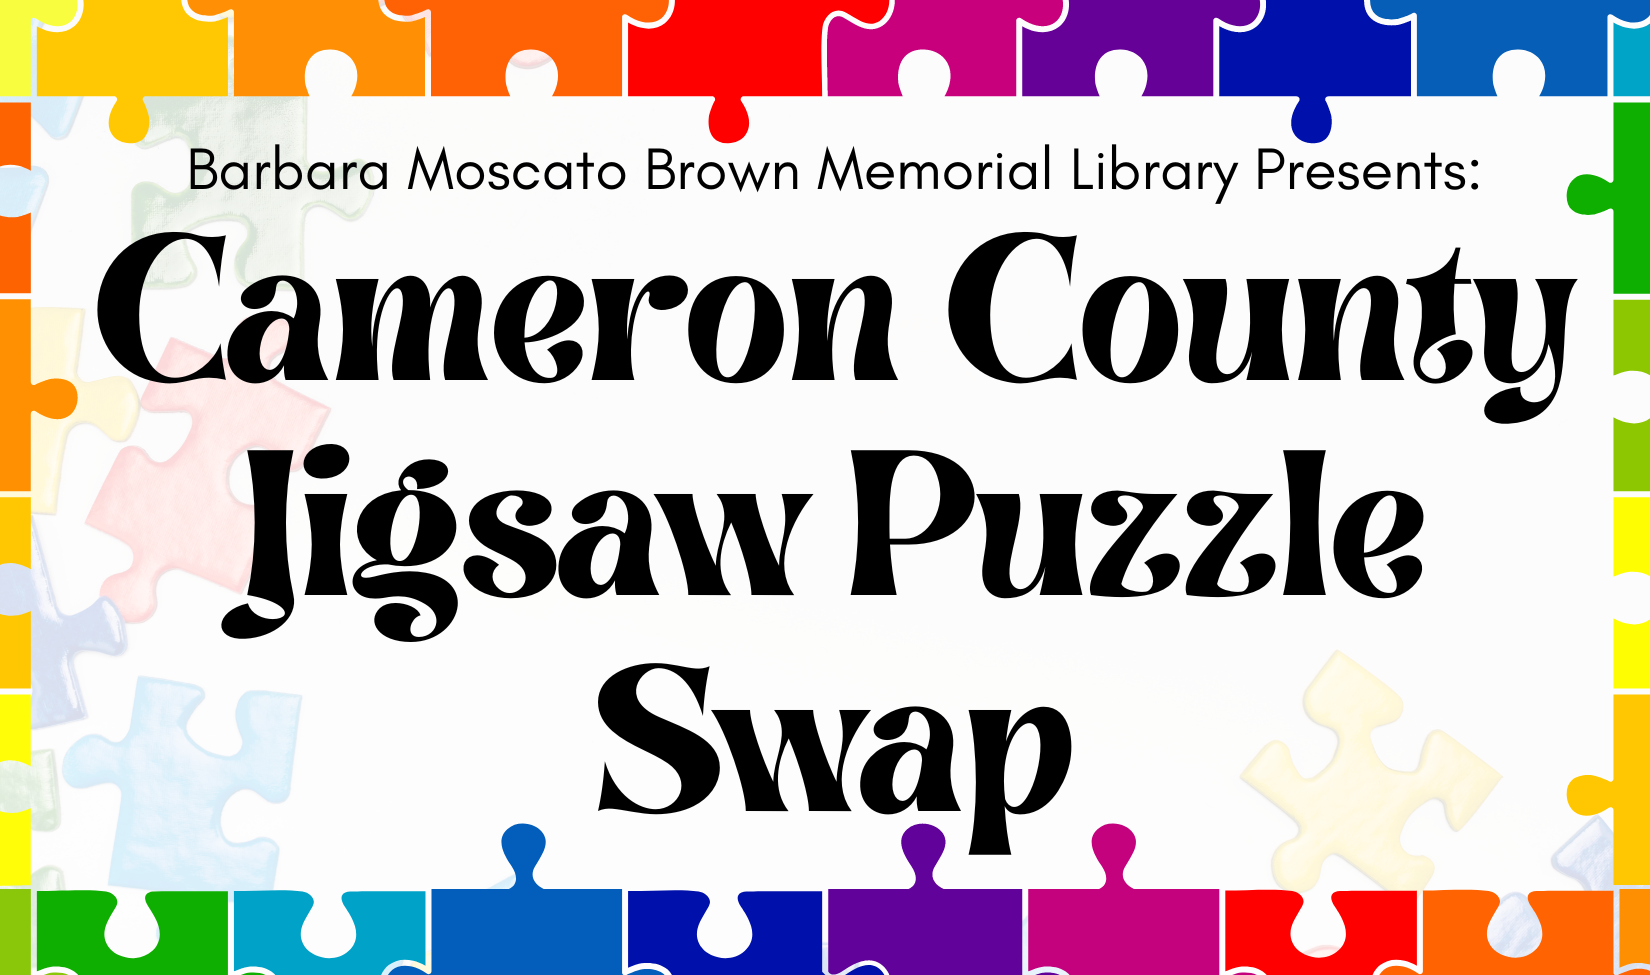 Jigsaw Puzzle pieces surround text reading Cameron County Jigsaw Puzzle Swap